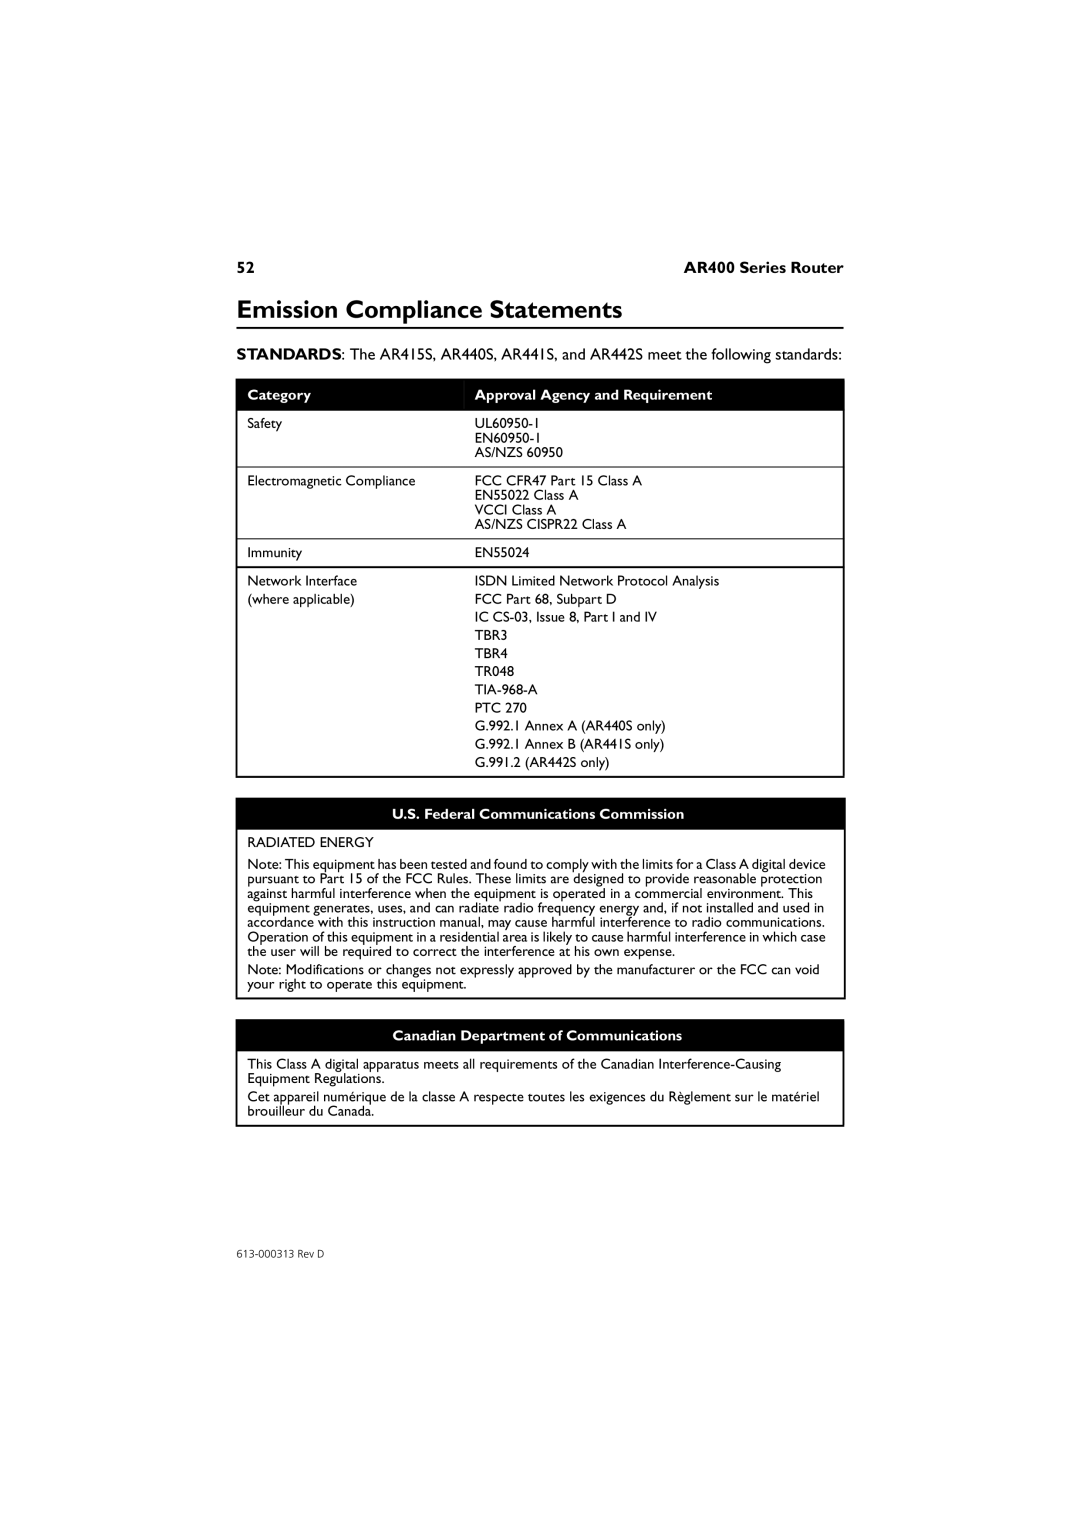 Allied Telesis AR440S manual Emission Compliance Statements, AR400 Series Router, Category, Approval Agency and Requirement 